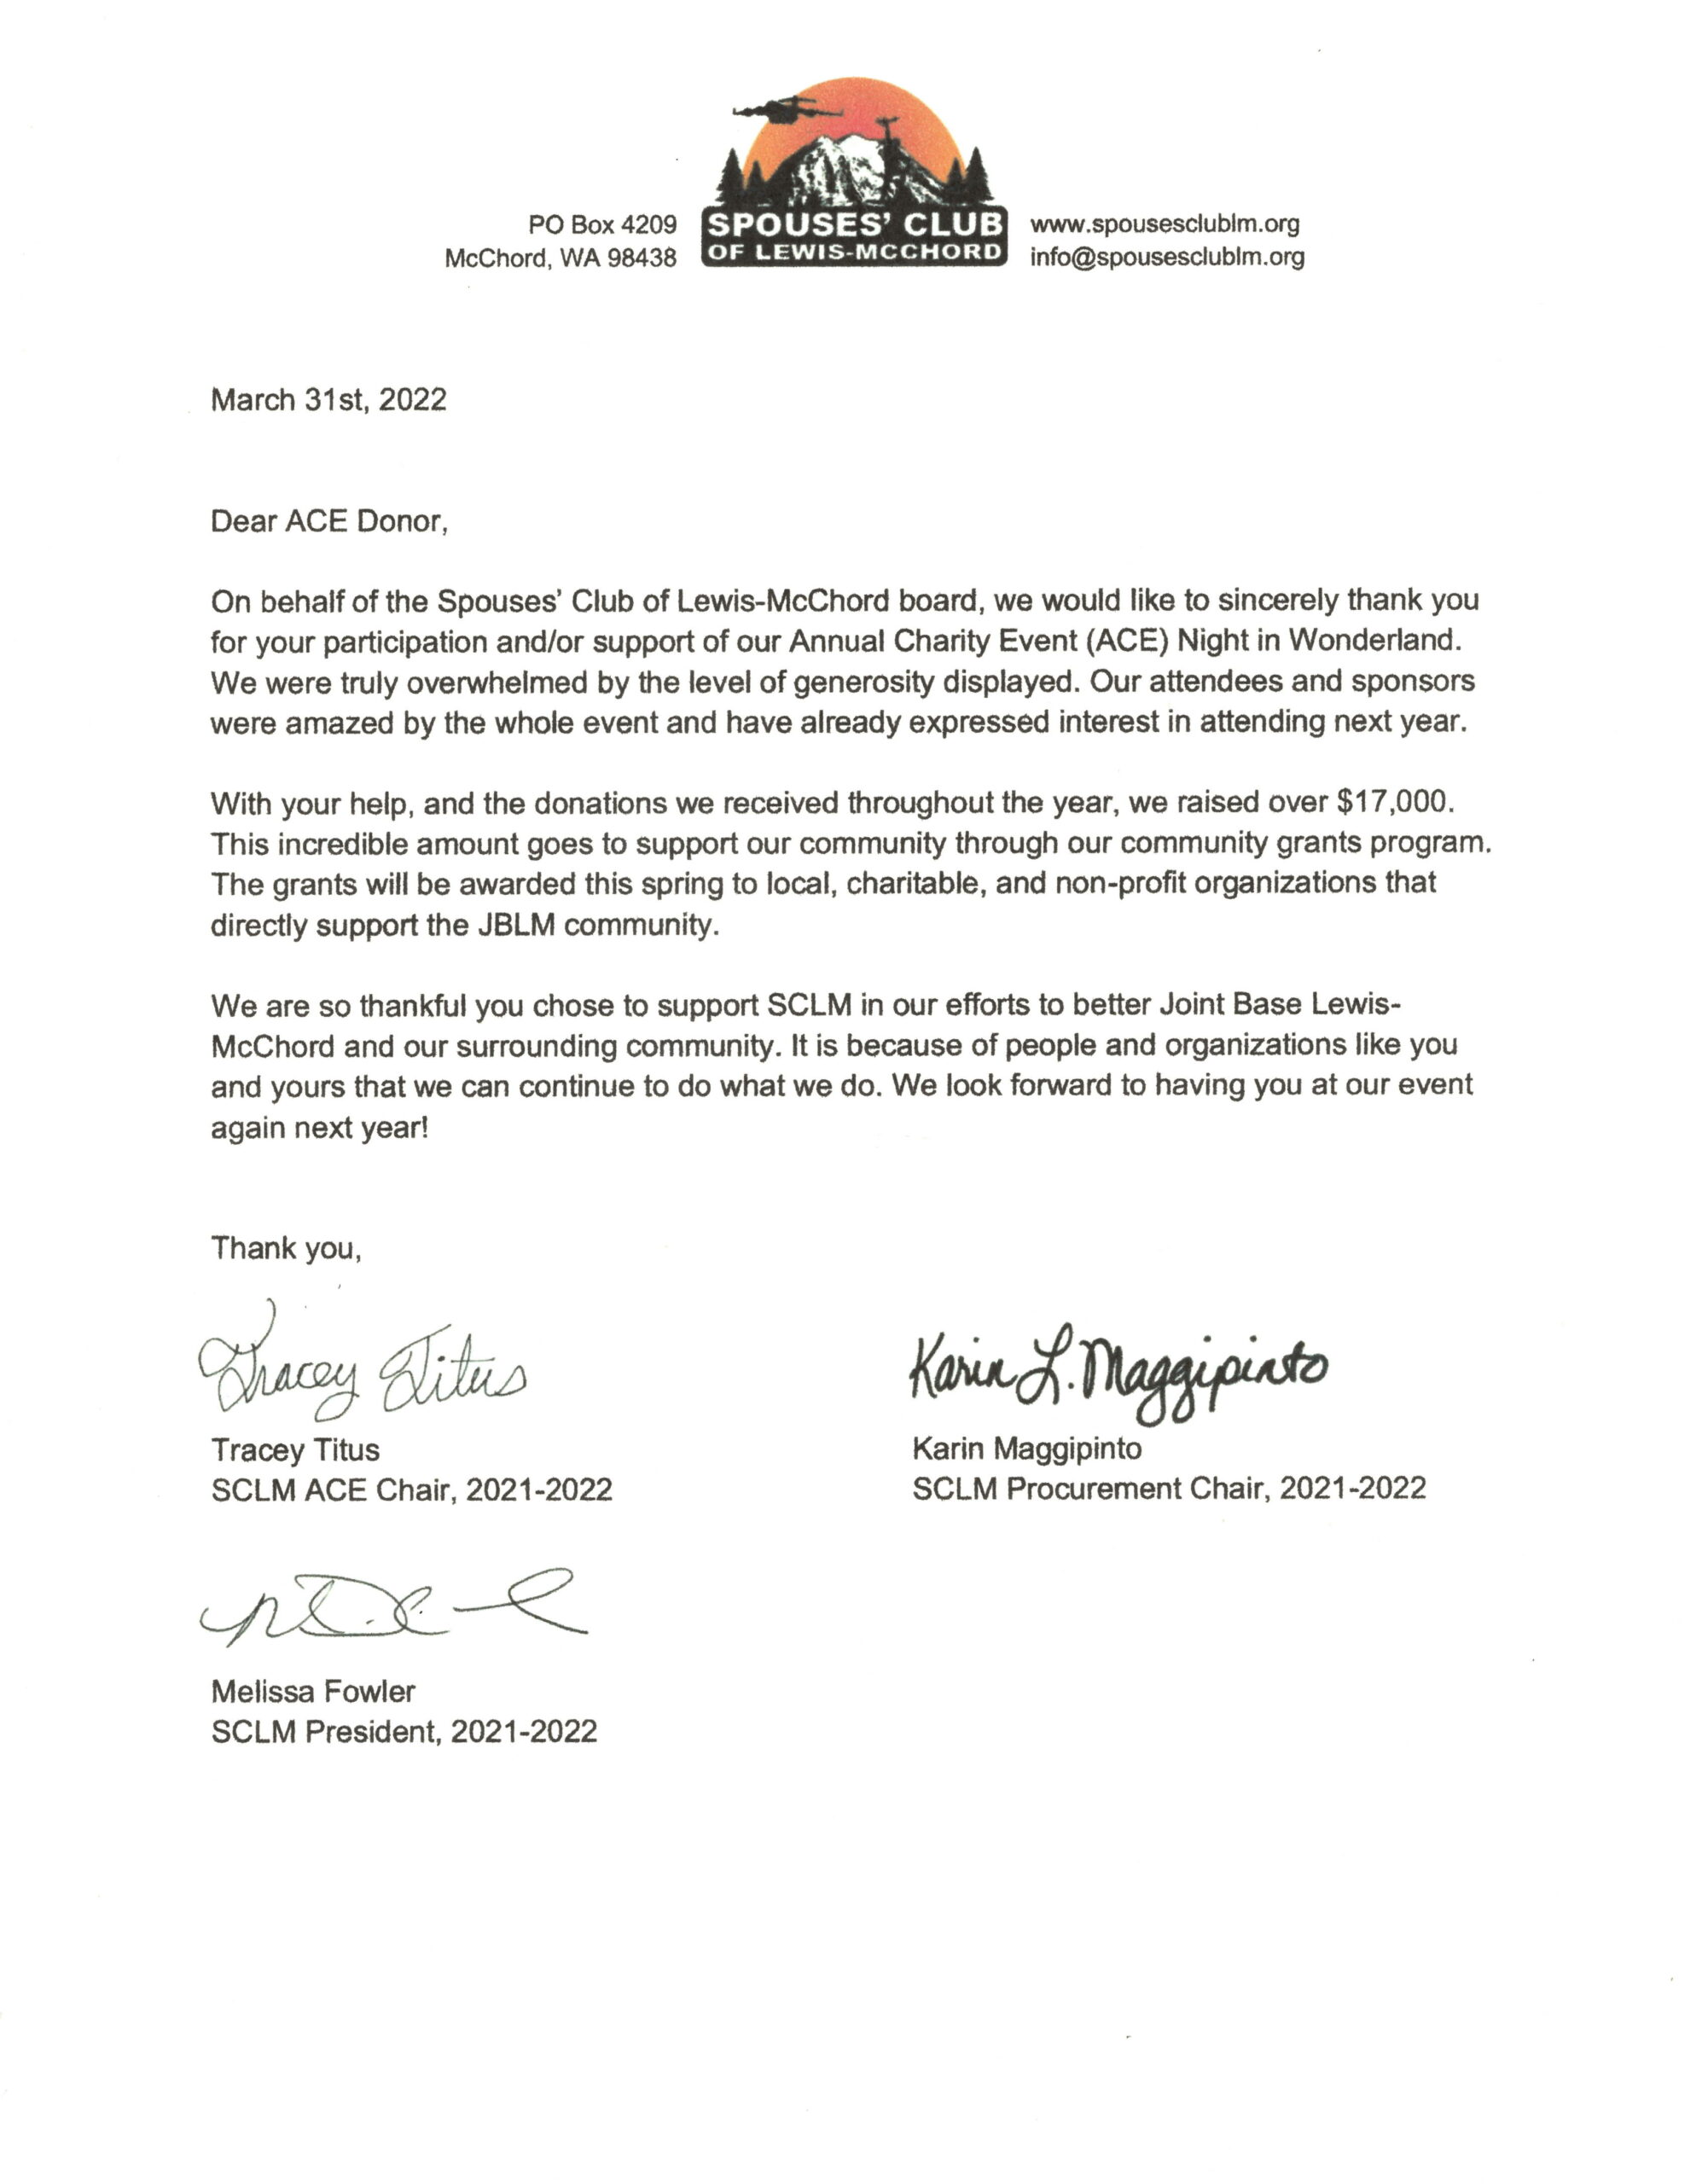 Spouses’ Club of Lewis-McChord Thank You Letter